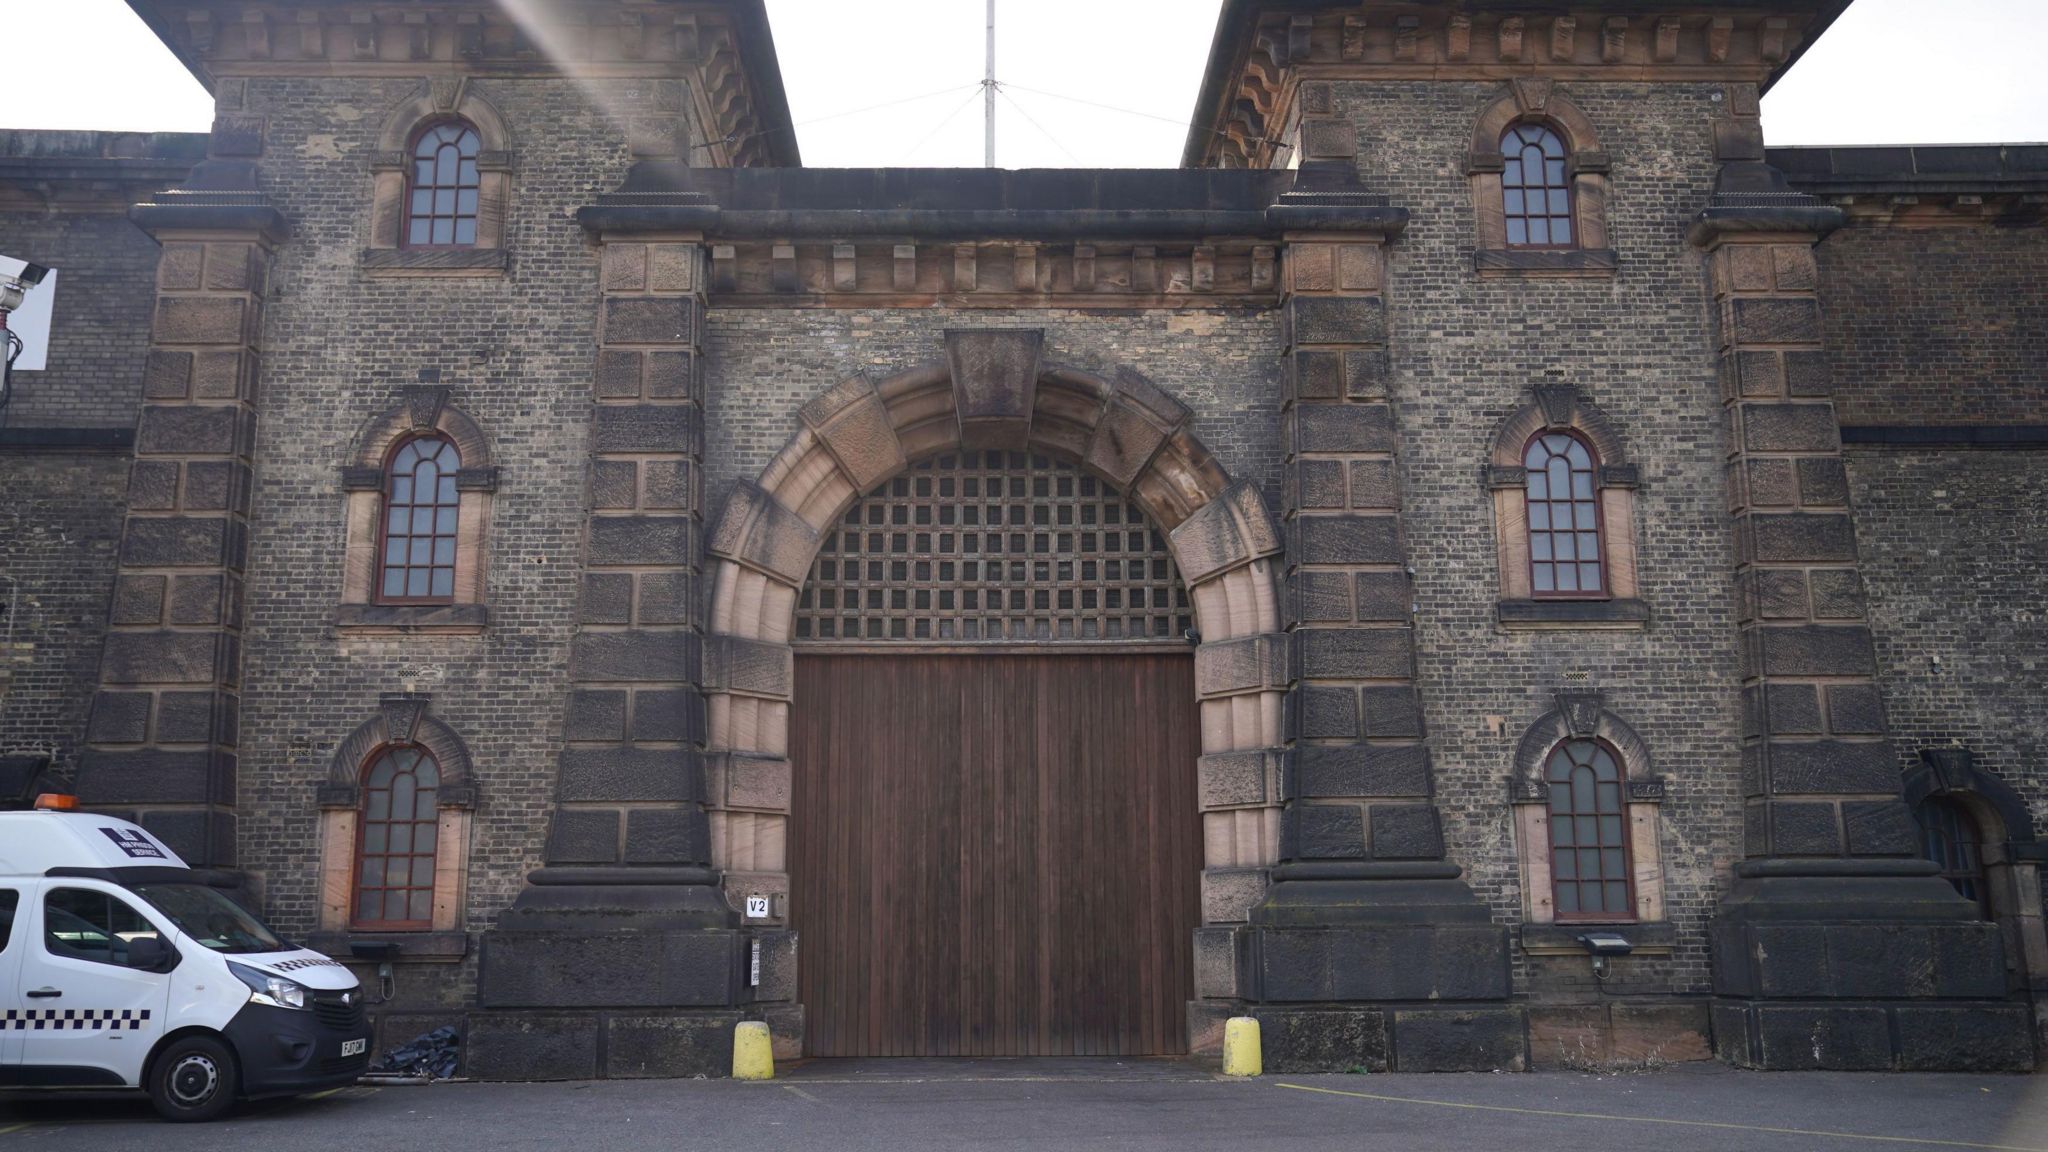 The main entrance to HMP Wandsworth, a Victorian stone building with a large archway entrance with a wooden door and latticed section above. Either side of the door are three arched windows. A police van is parked to the left of the building.